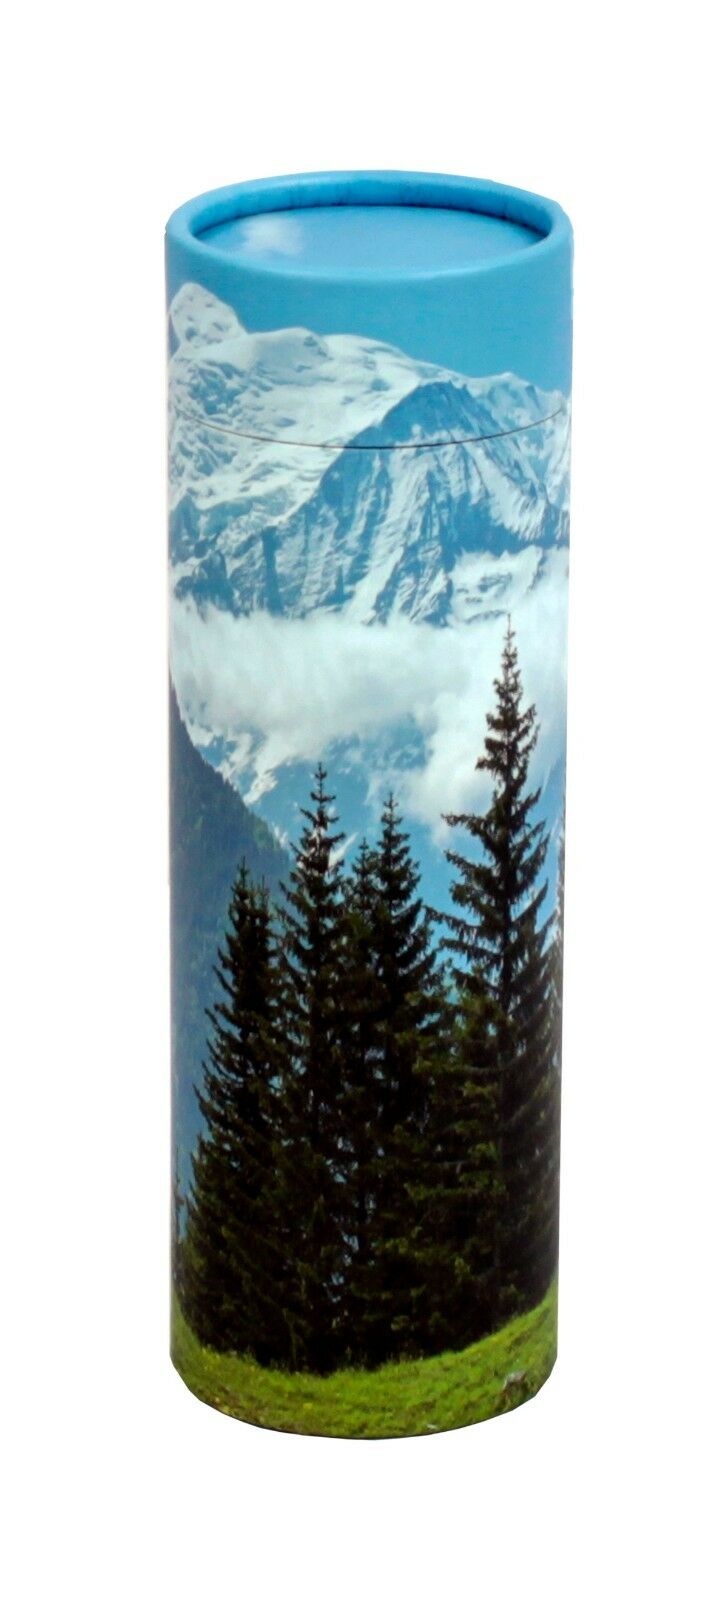 Biodegradable Ash Scattering Tube Funeral Cremation Urn - 40 cubic inches